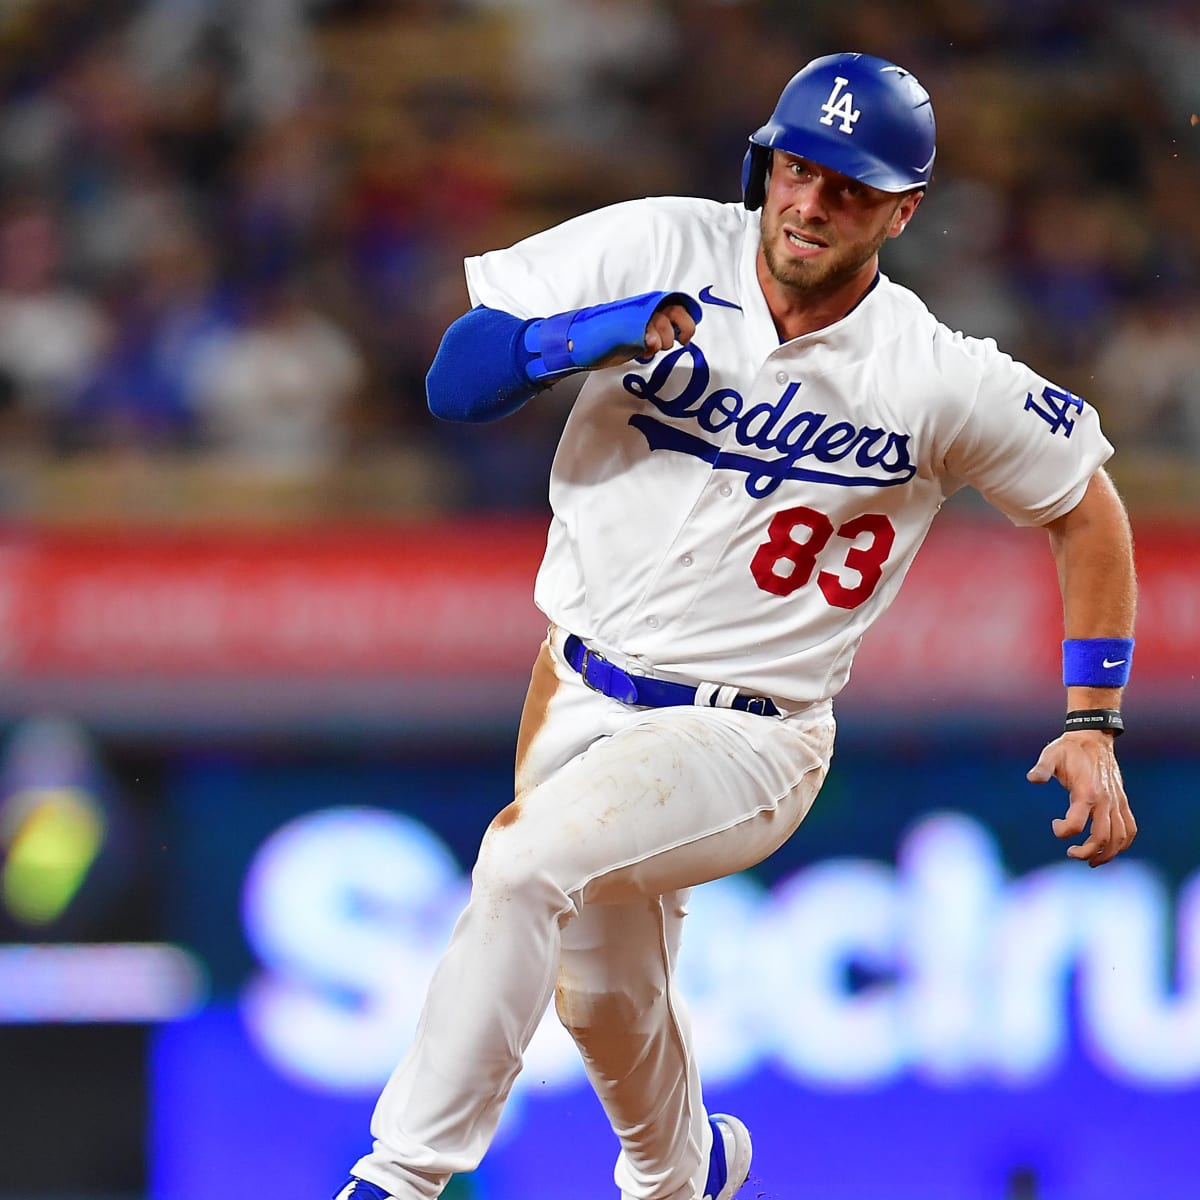 Dodgers-Cubs 4-player trade on arbitration day marks end of 